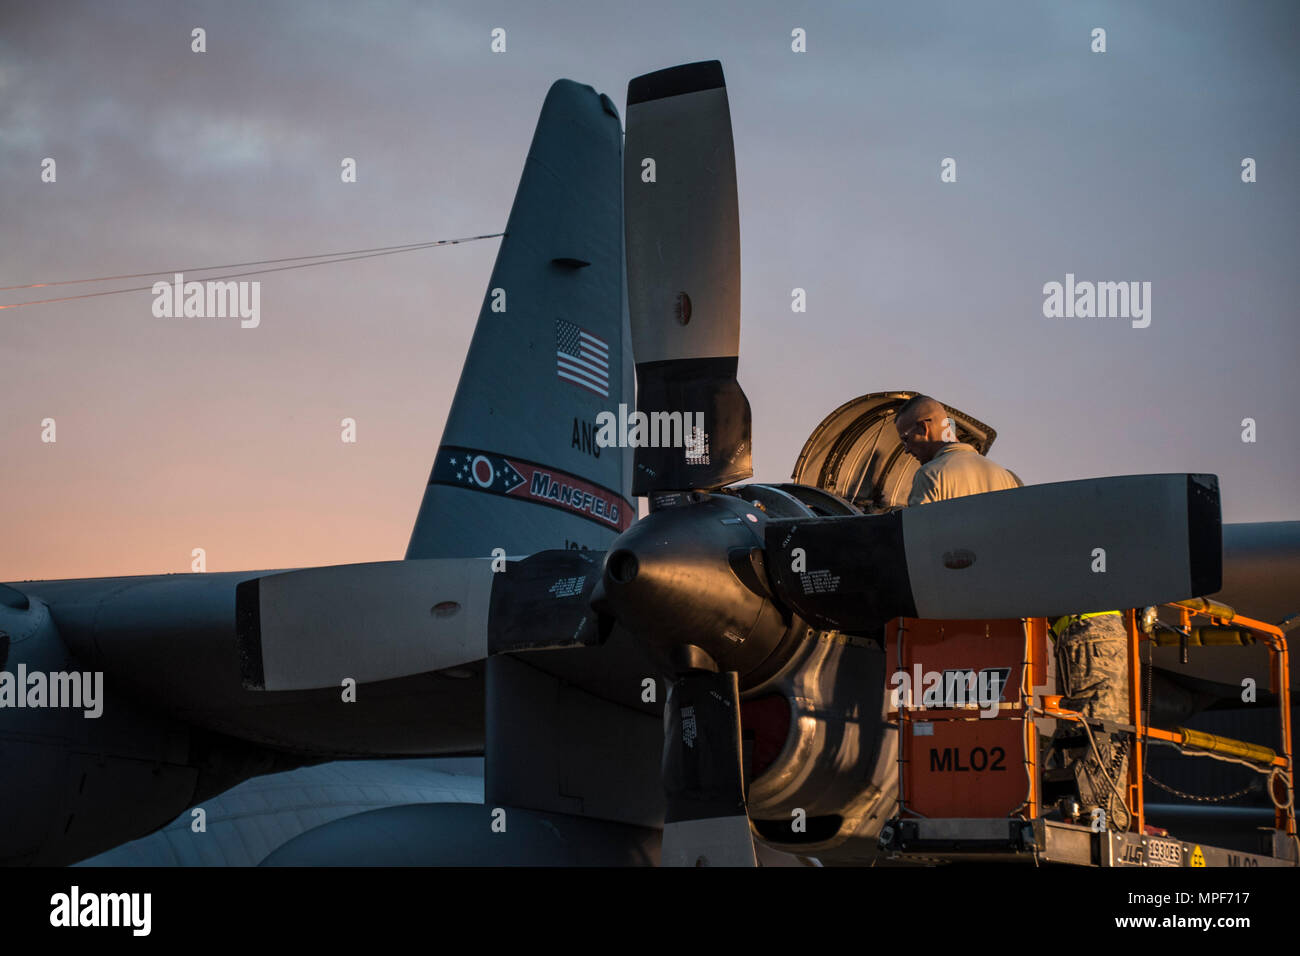 179th Airlift Wing Maintenance members work on the engine of a C-130H Hercules as the sun rises, Feb. 21, 2017, at the 179th Airlift Wing, Mansfield, Ohio.  The 179th Airlift Wing is always on mission to be the first choice to respond to community, state and federal missions with a trusted team of highly qualified Airmen. (U.S. Air National Guard photo by 1st Lt. Paul Stennett/Released) Stock Photo